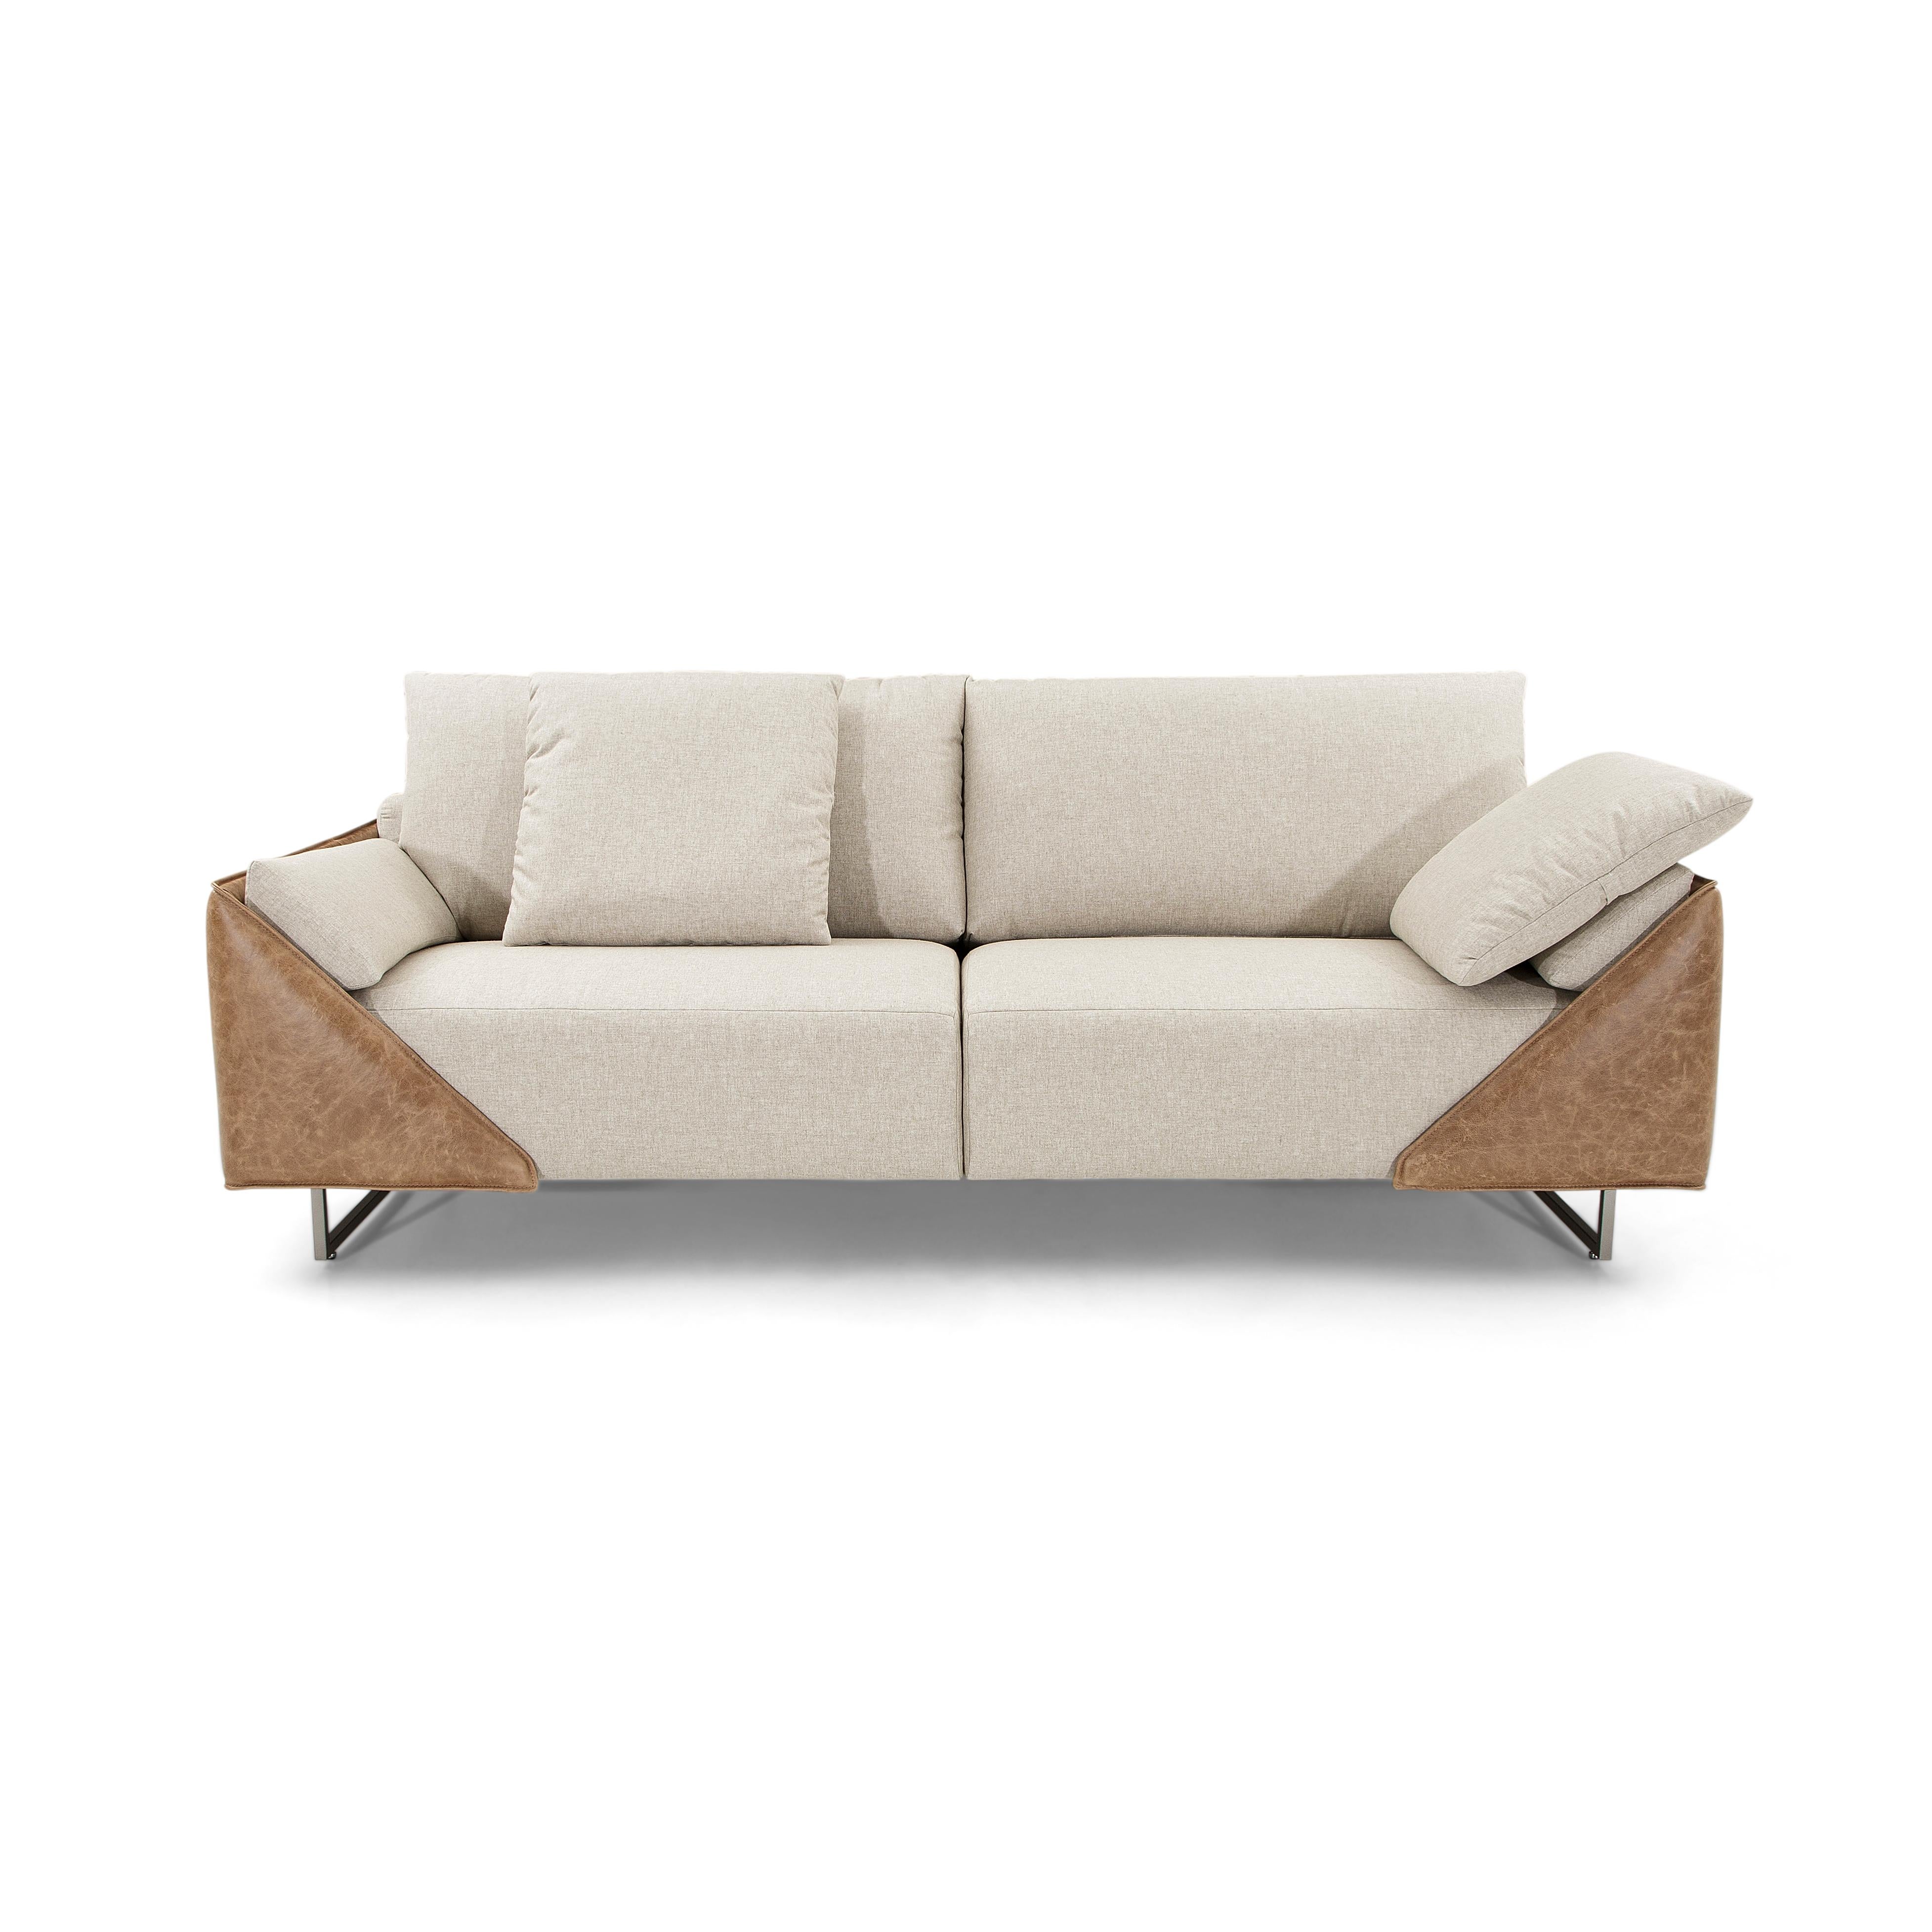 The Gondole contemporary sofa upholstered in a stunning beige fabric and its arms in brown leather, is the perfect combination for your living room. As relaxing as it looks, the actual seat is even better. This sofa is the perfect complement to a